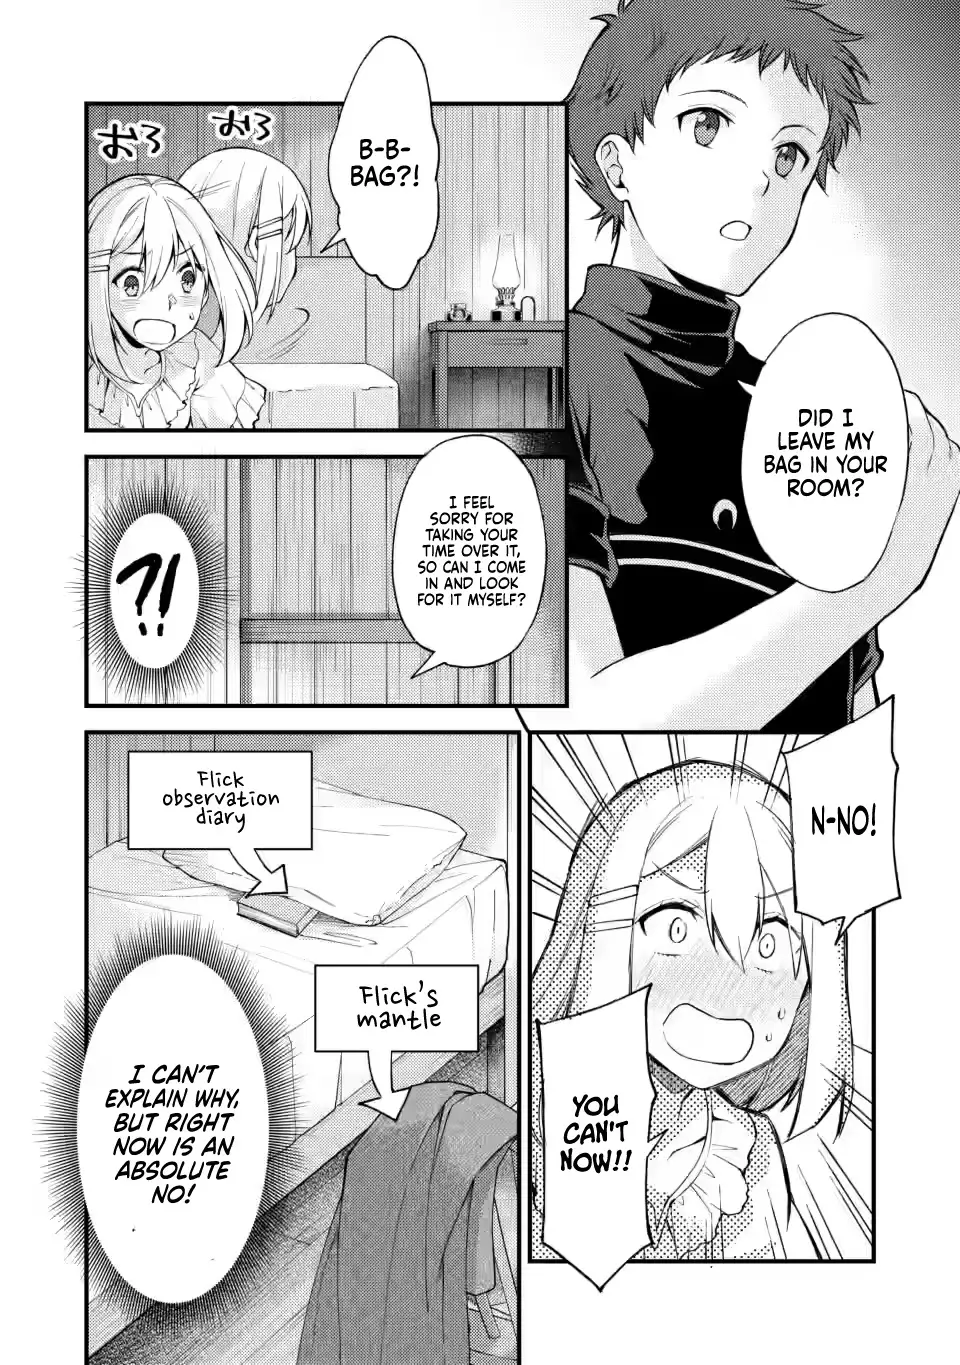 A Sword Master Childhood Friend Power Harassed Me Harshly, So I Broke Off Our Relationship And Make A Fresh Start At The Frontier As A Magic Swordsman. - 12 page 26-c3b37f52